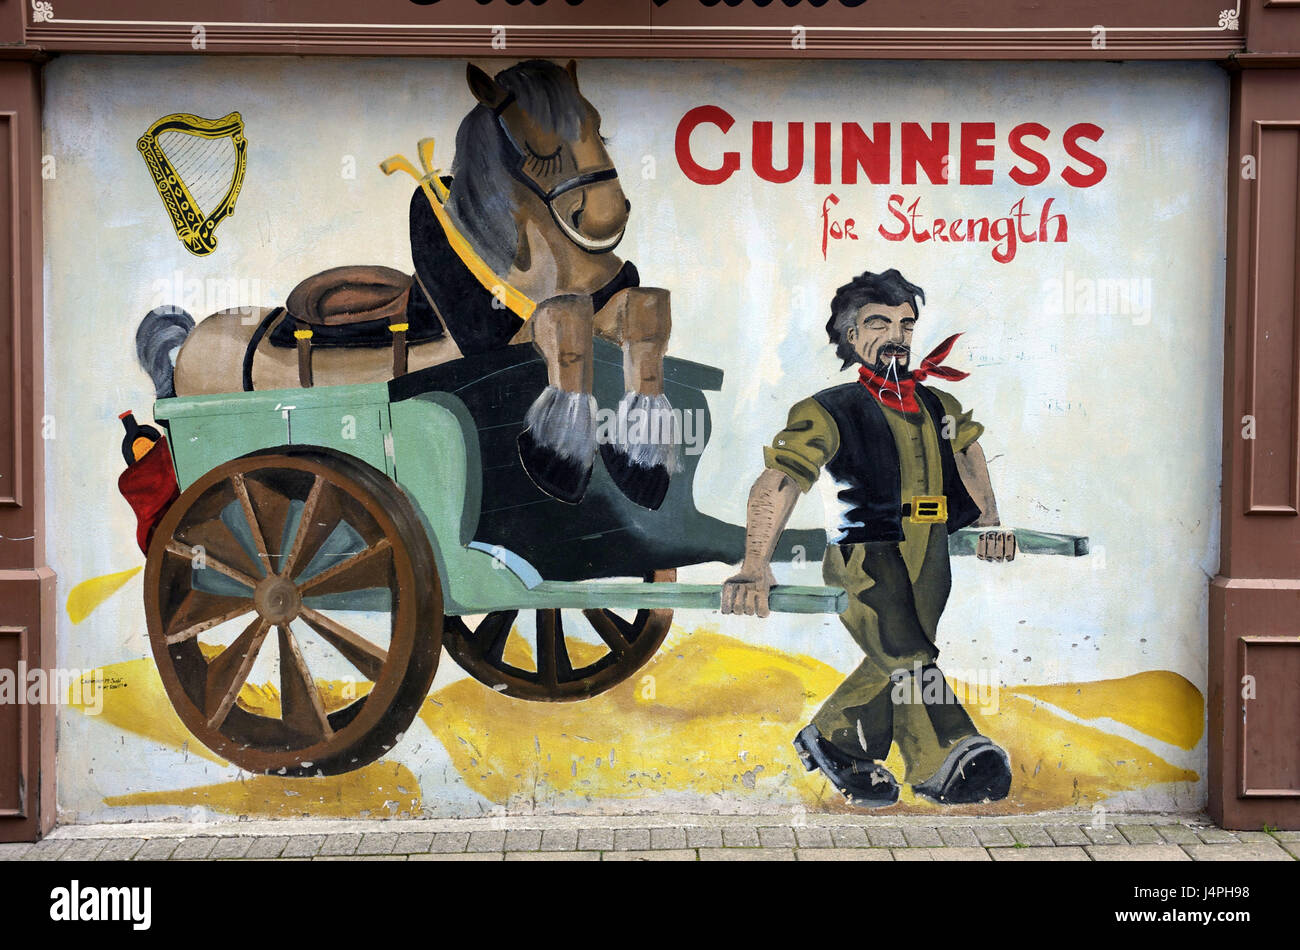 Northern Ireland, Ulster, county Derry, Derry, wall painting, advertisement, Guinness, Stock Photo